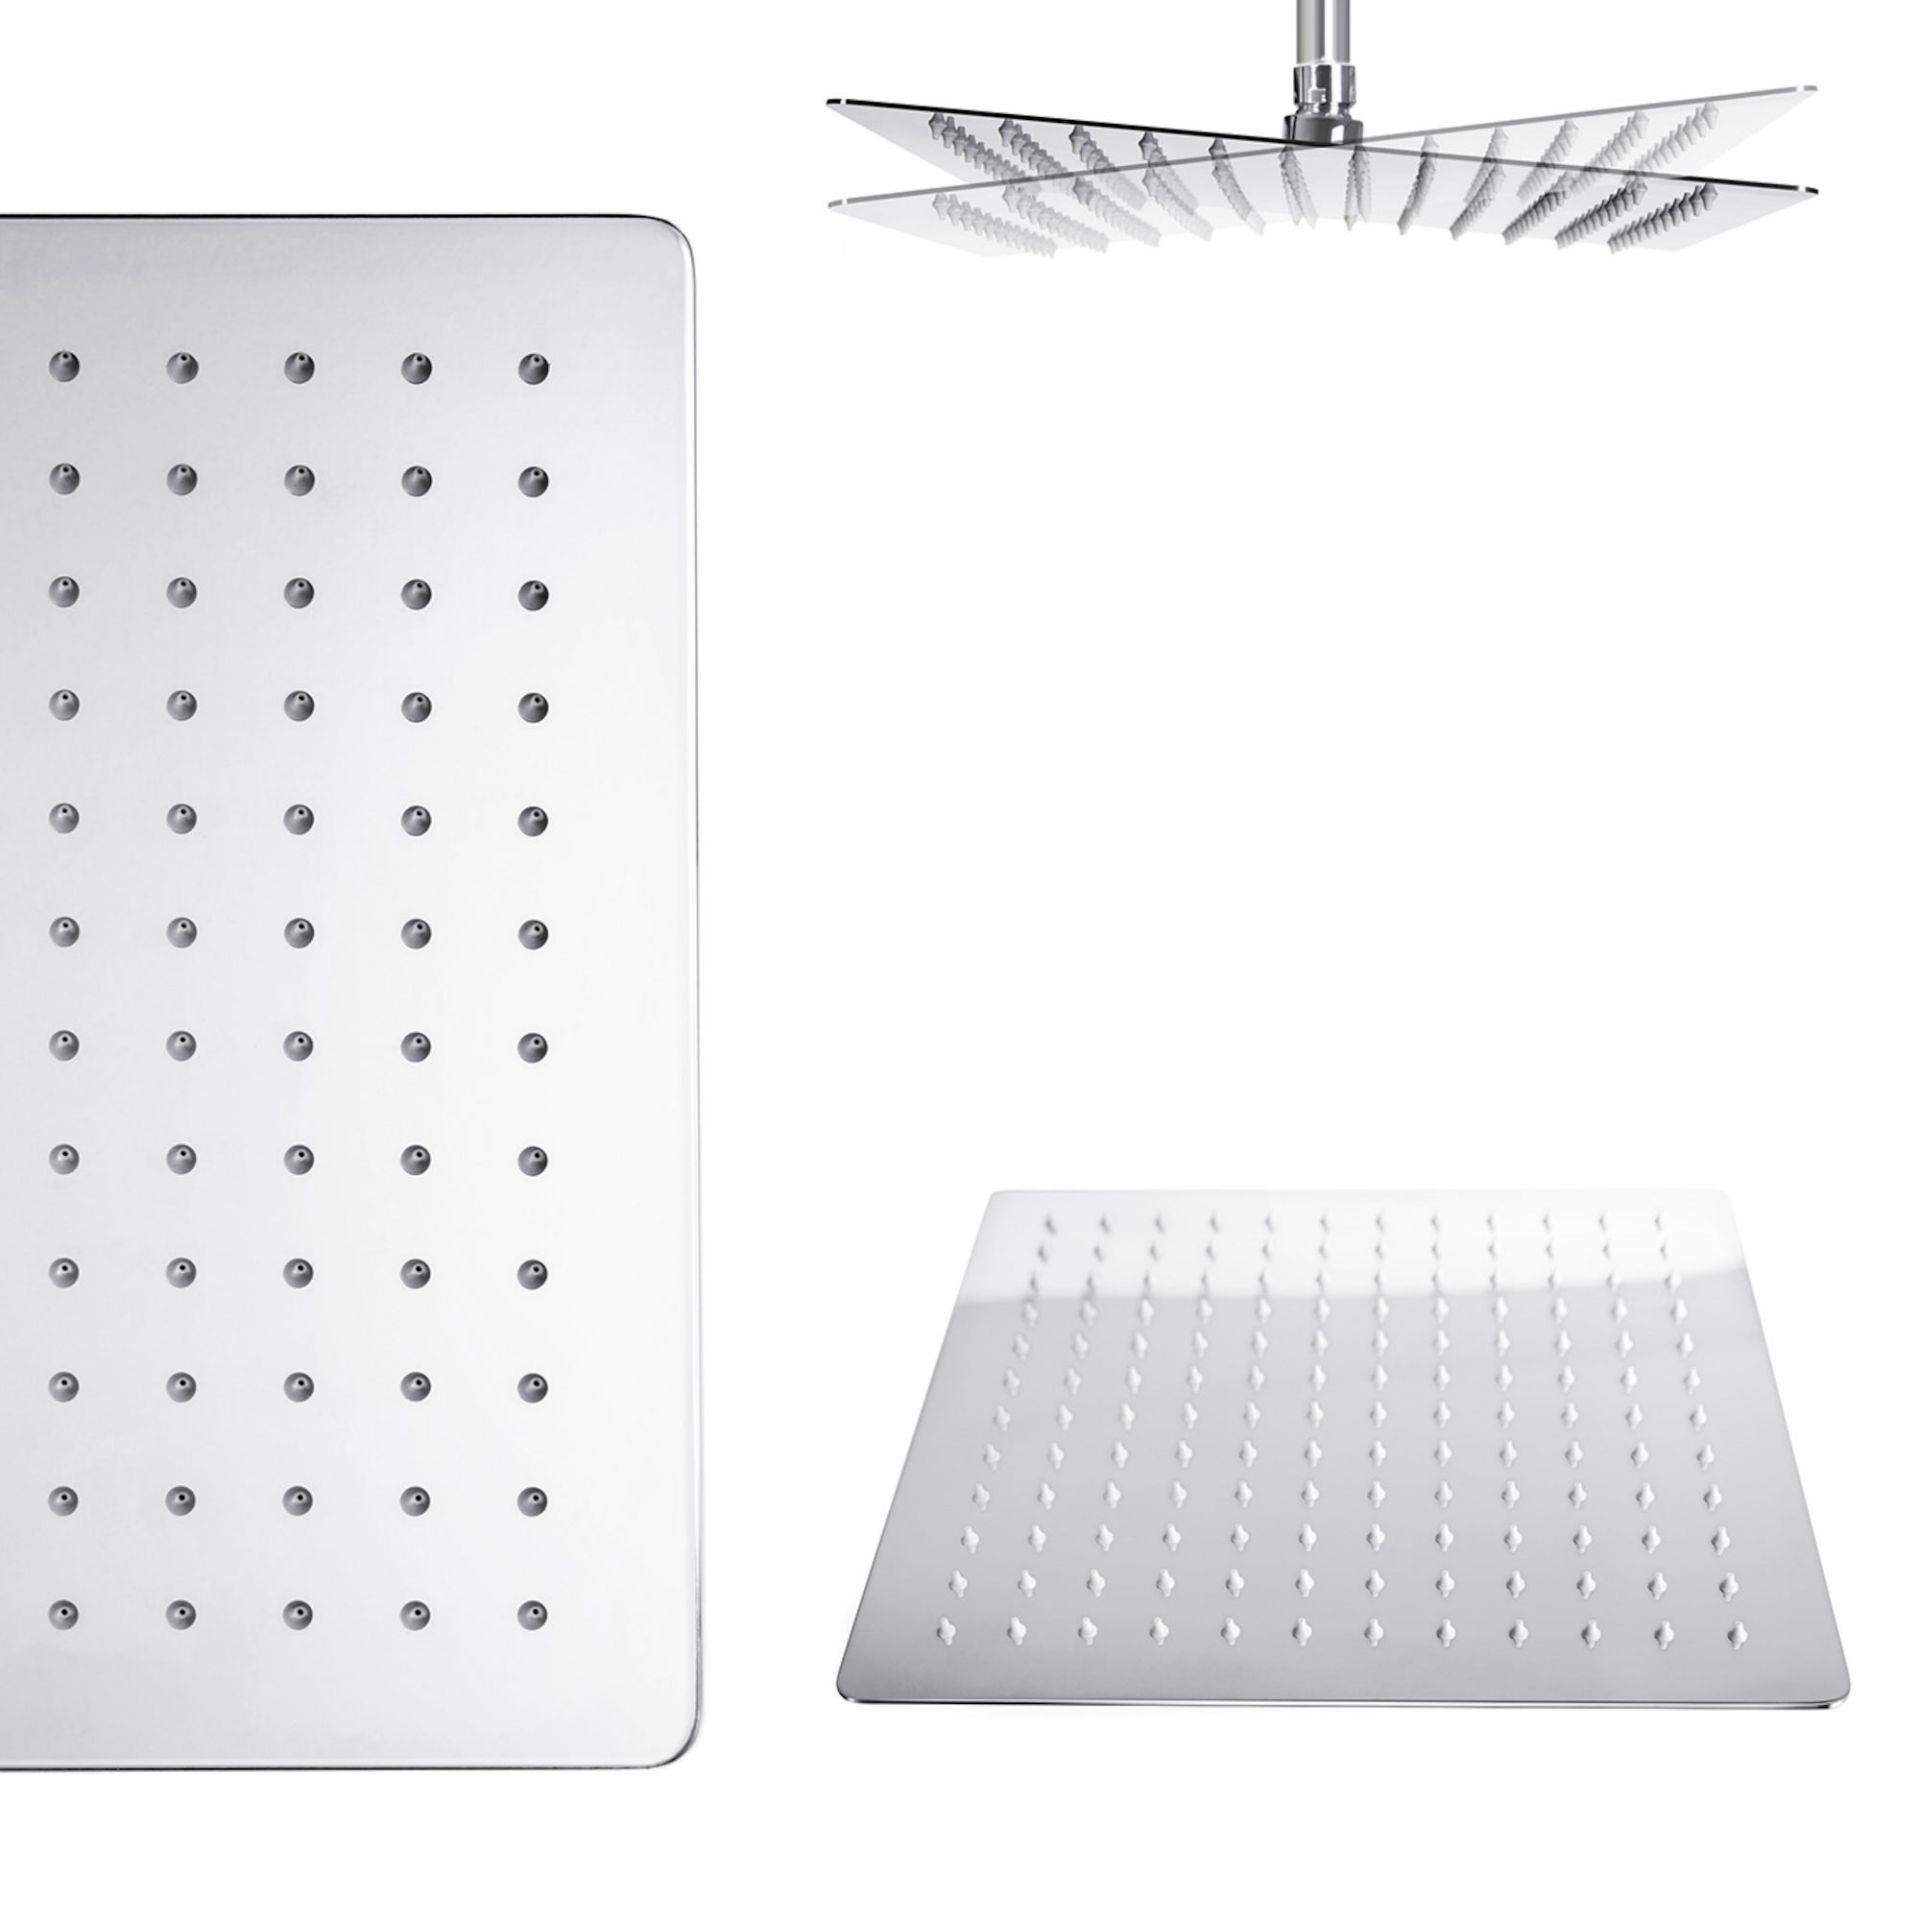 (AD163) Stainless Steel 300mm Square Shower Head Solid metal structure Can be wall or ceiling m...